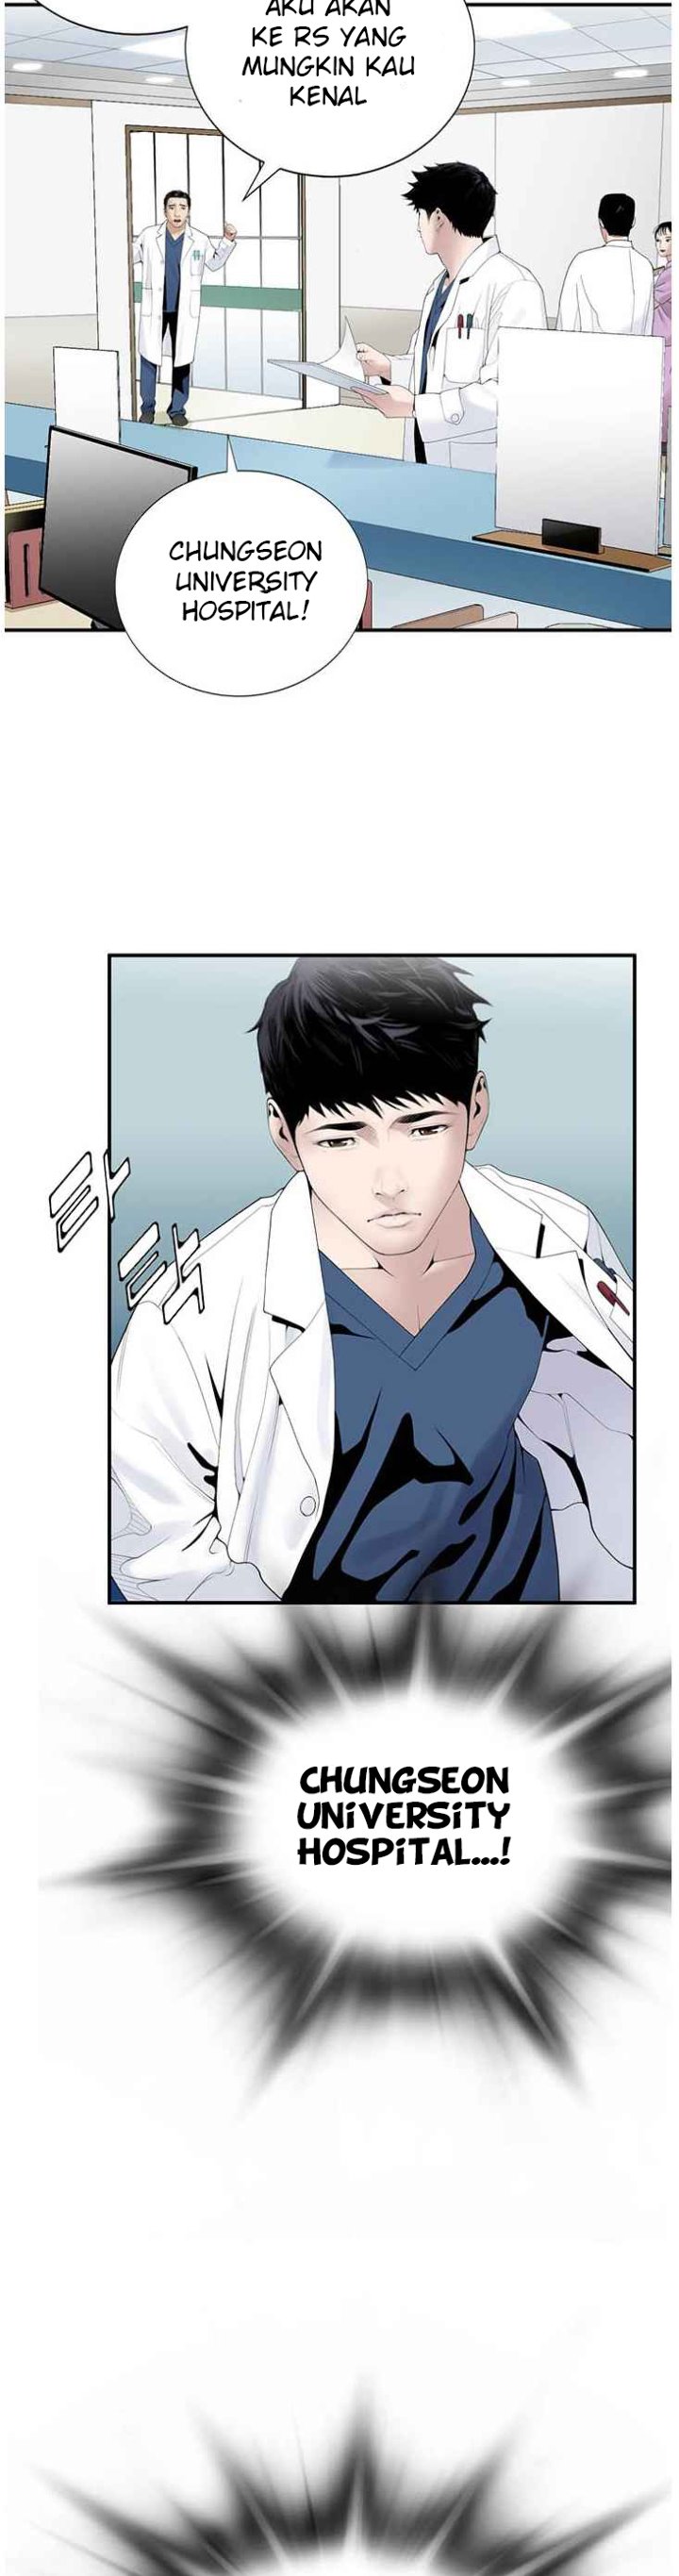 Dr. Choi Tae-Soo Chapter 18